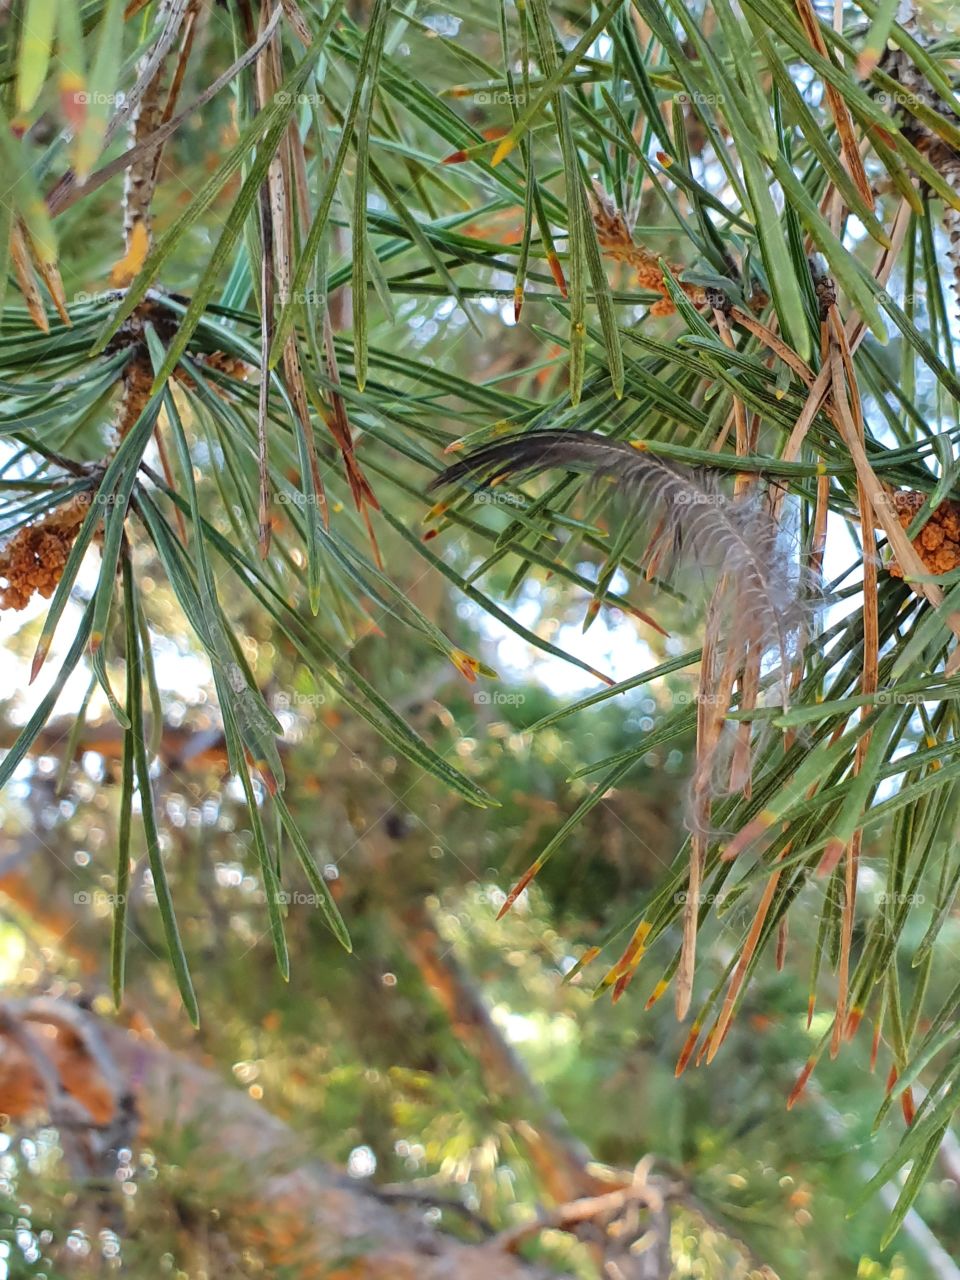 pigeon feather on a pine tree branch